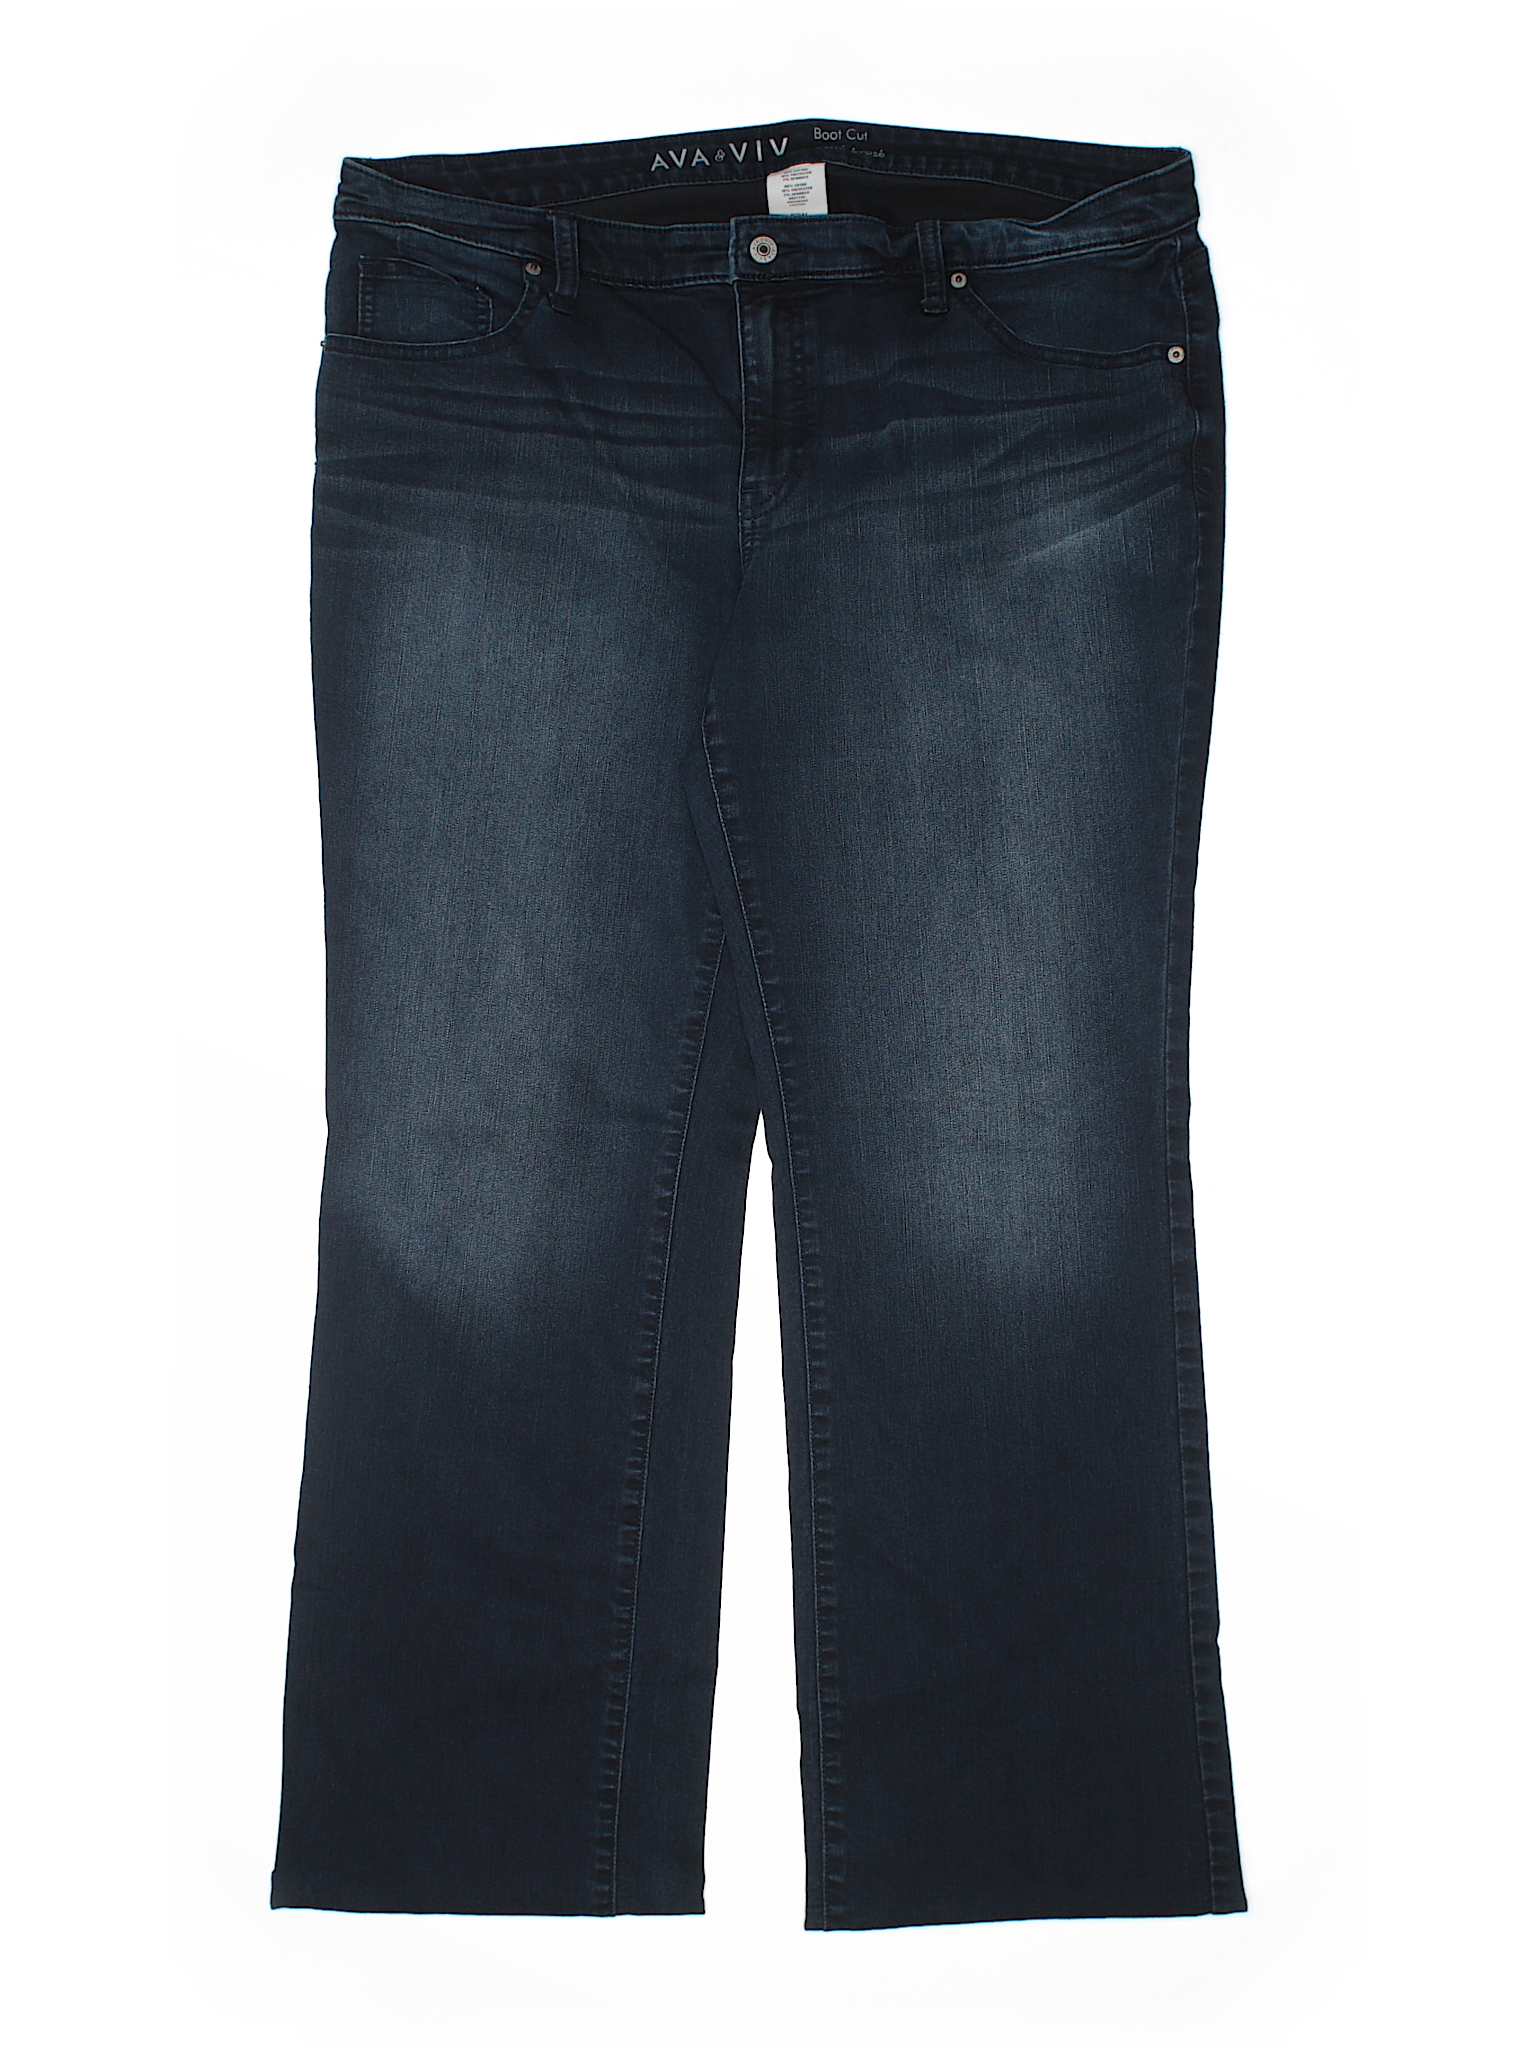 ava and viv bootcut jeans